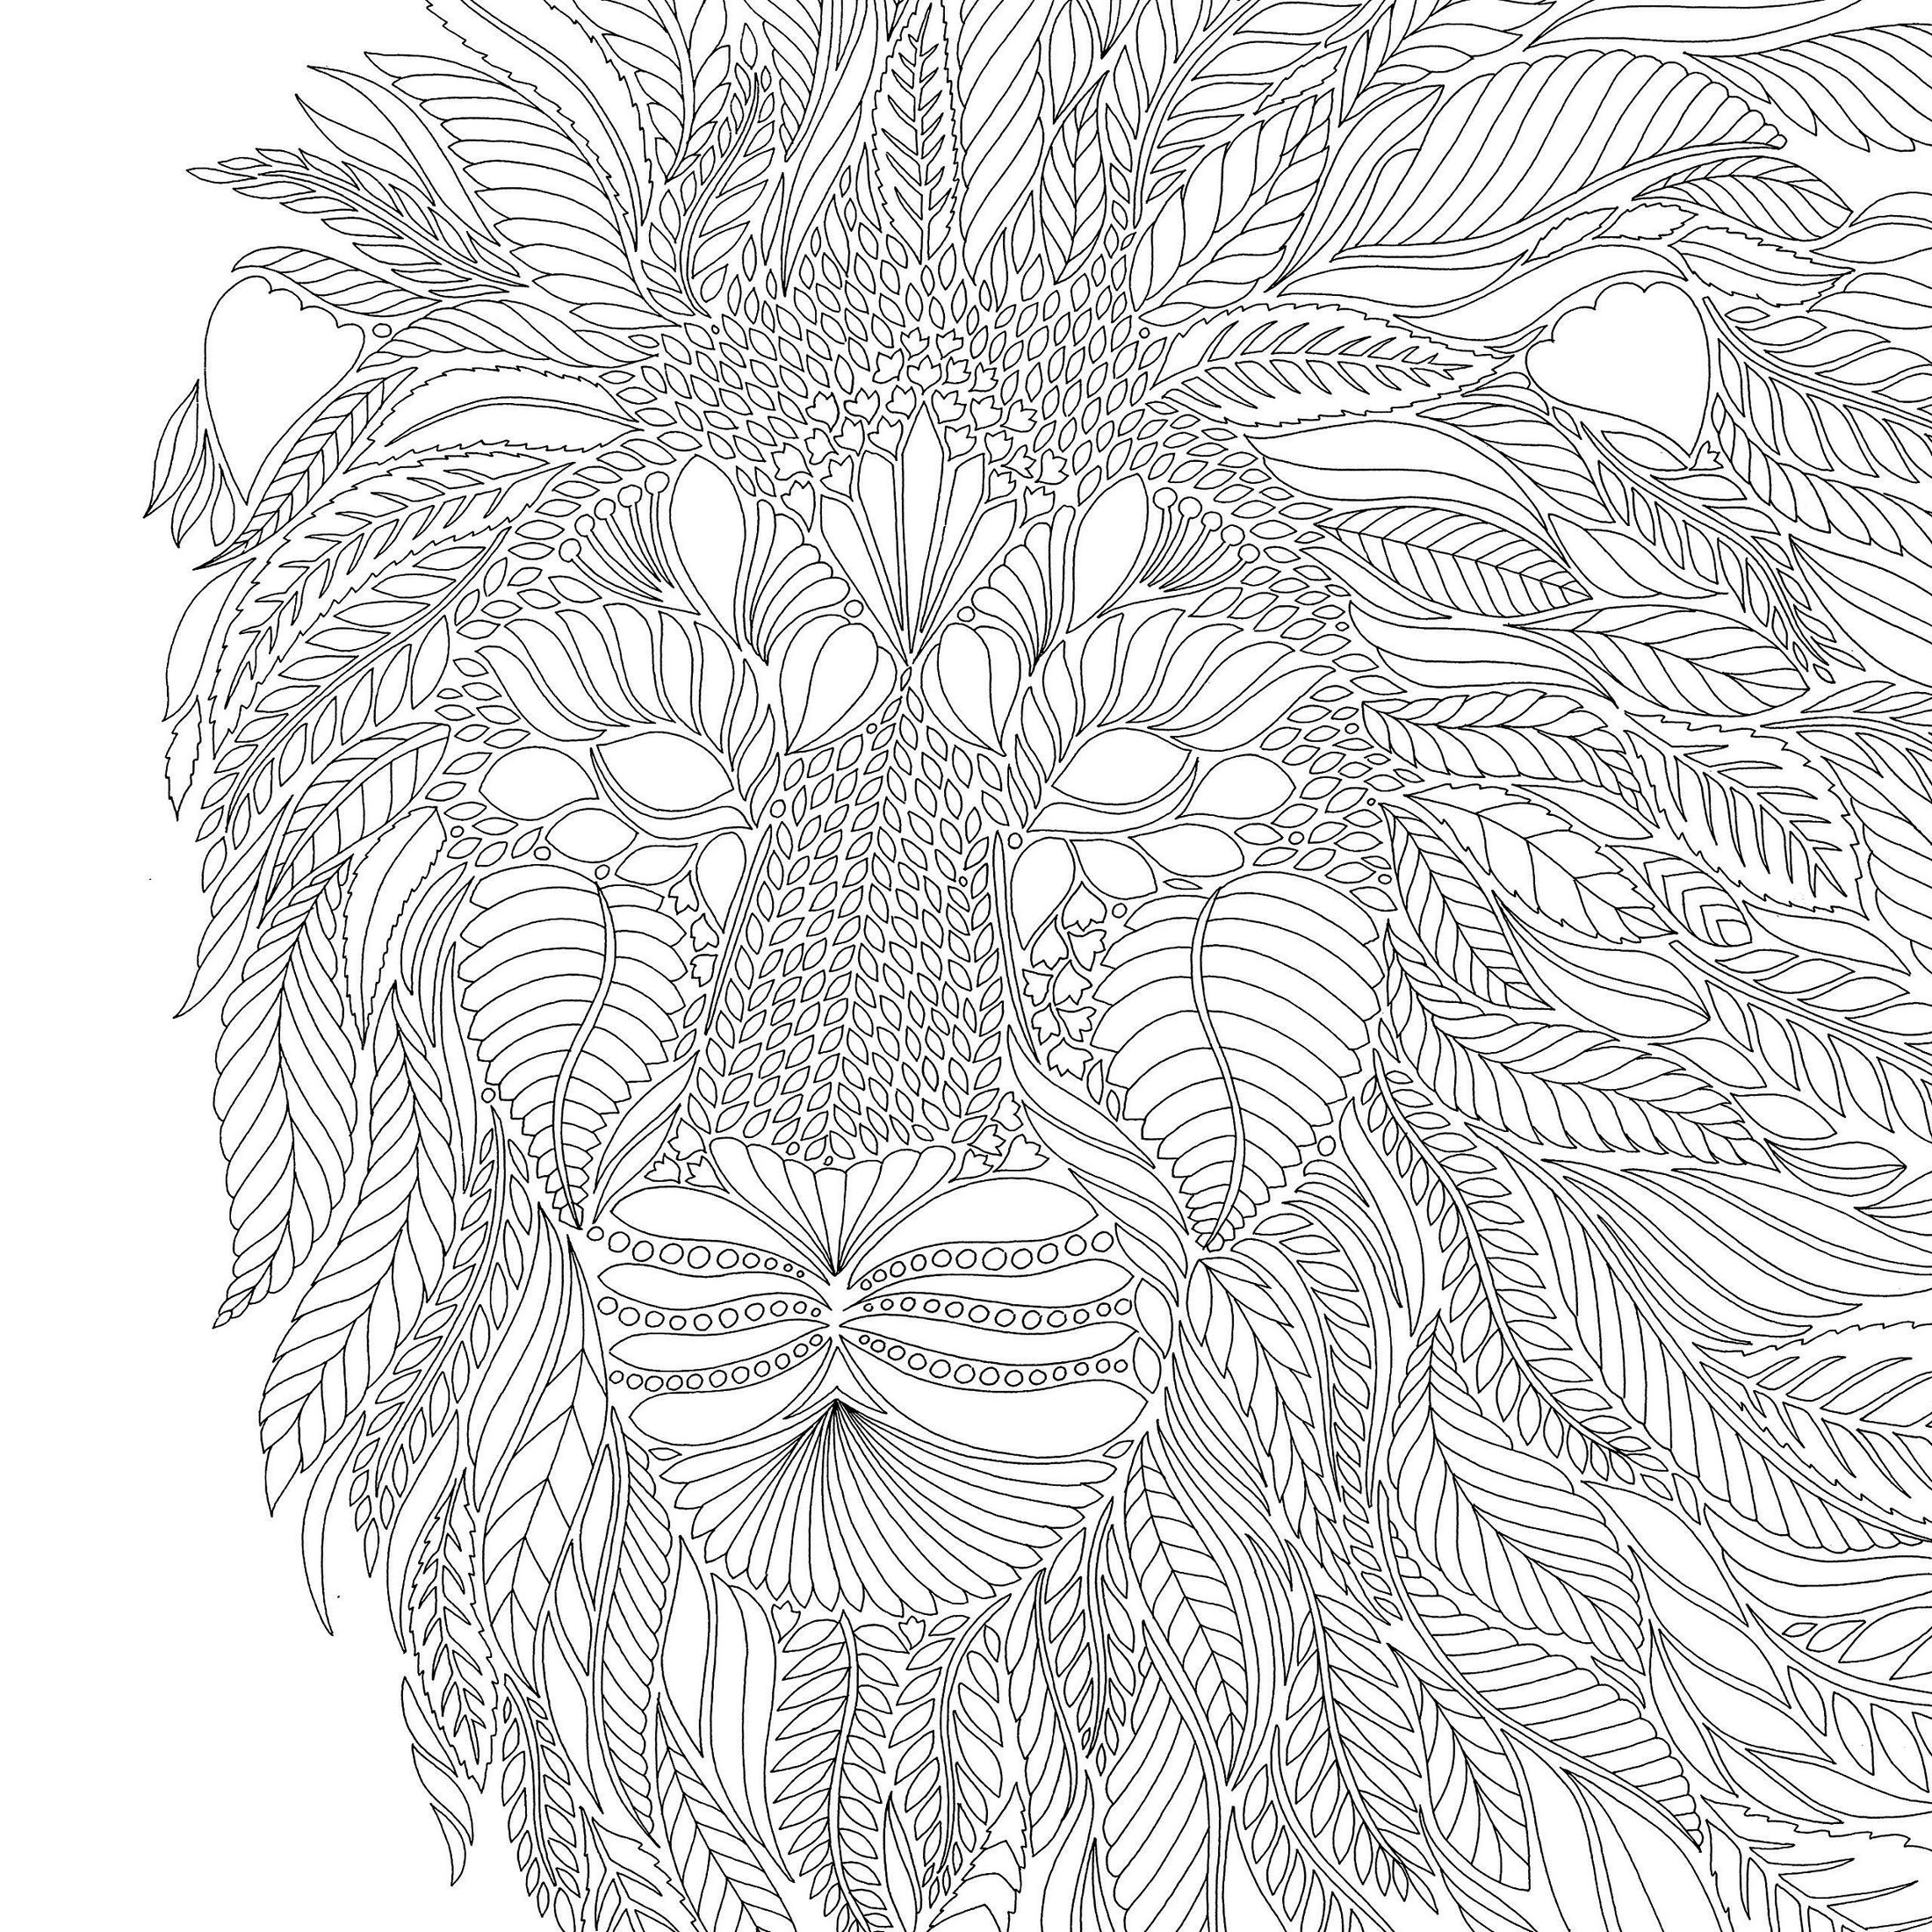 Magical Jungle Lion print out drawing